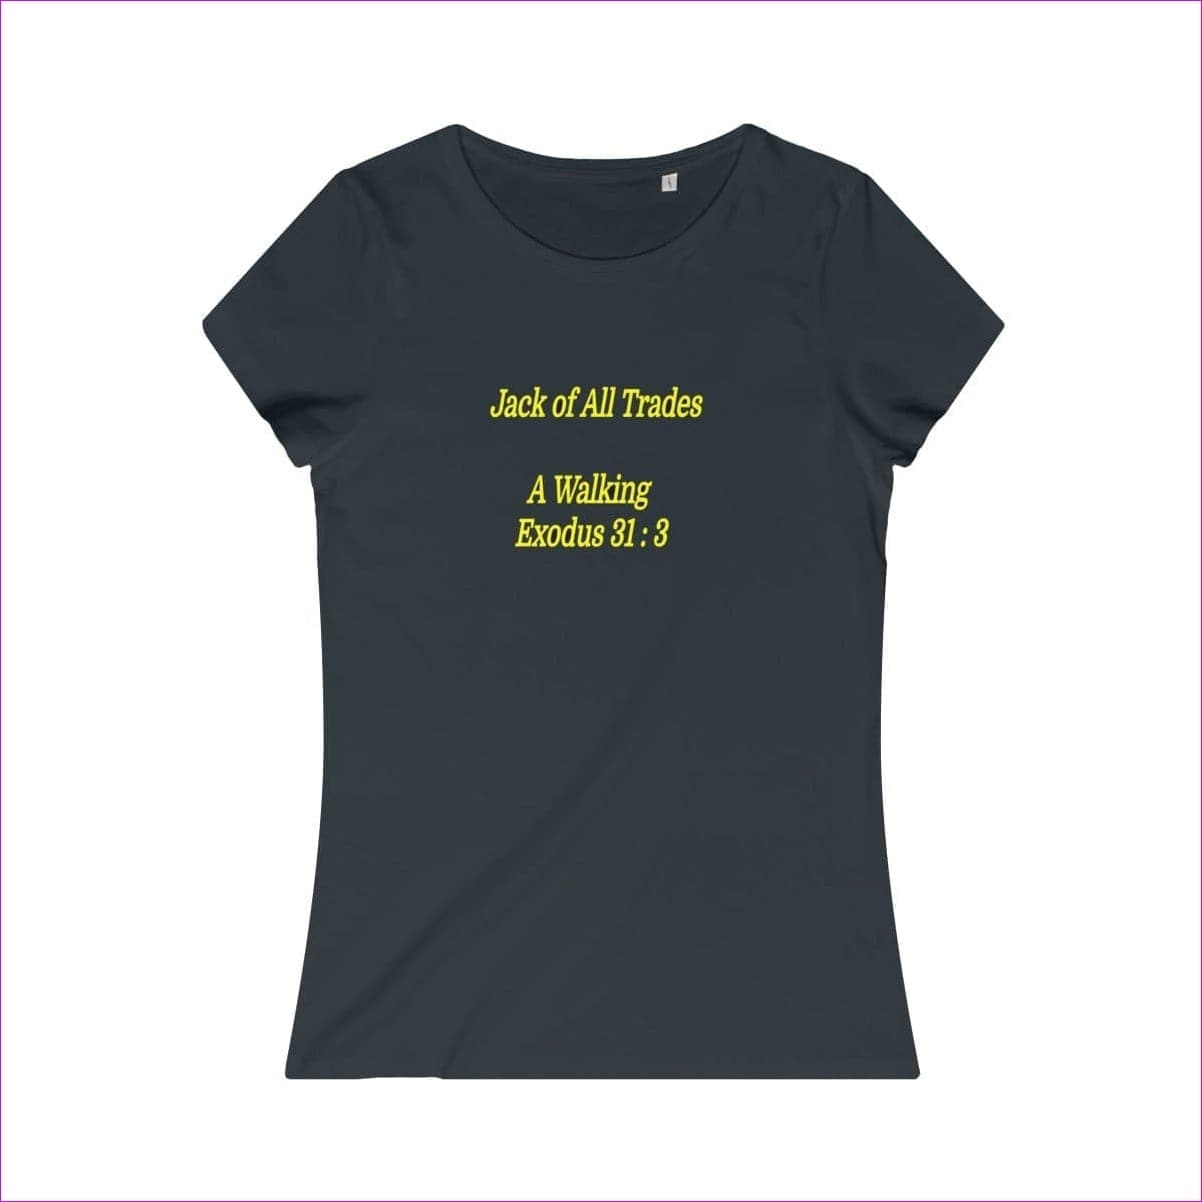 Black Jack of All Trades Womens Organic Tee - women's T-Shirt at TFC&H Co.